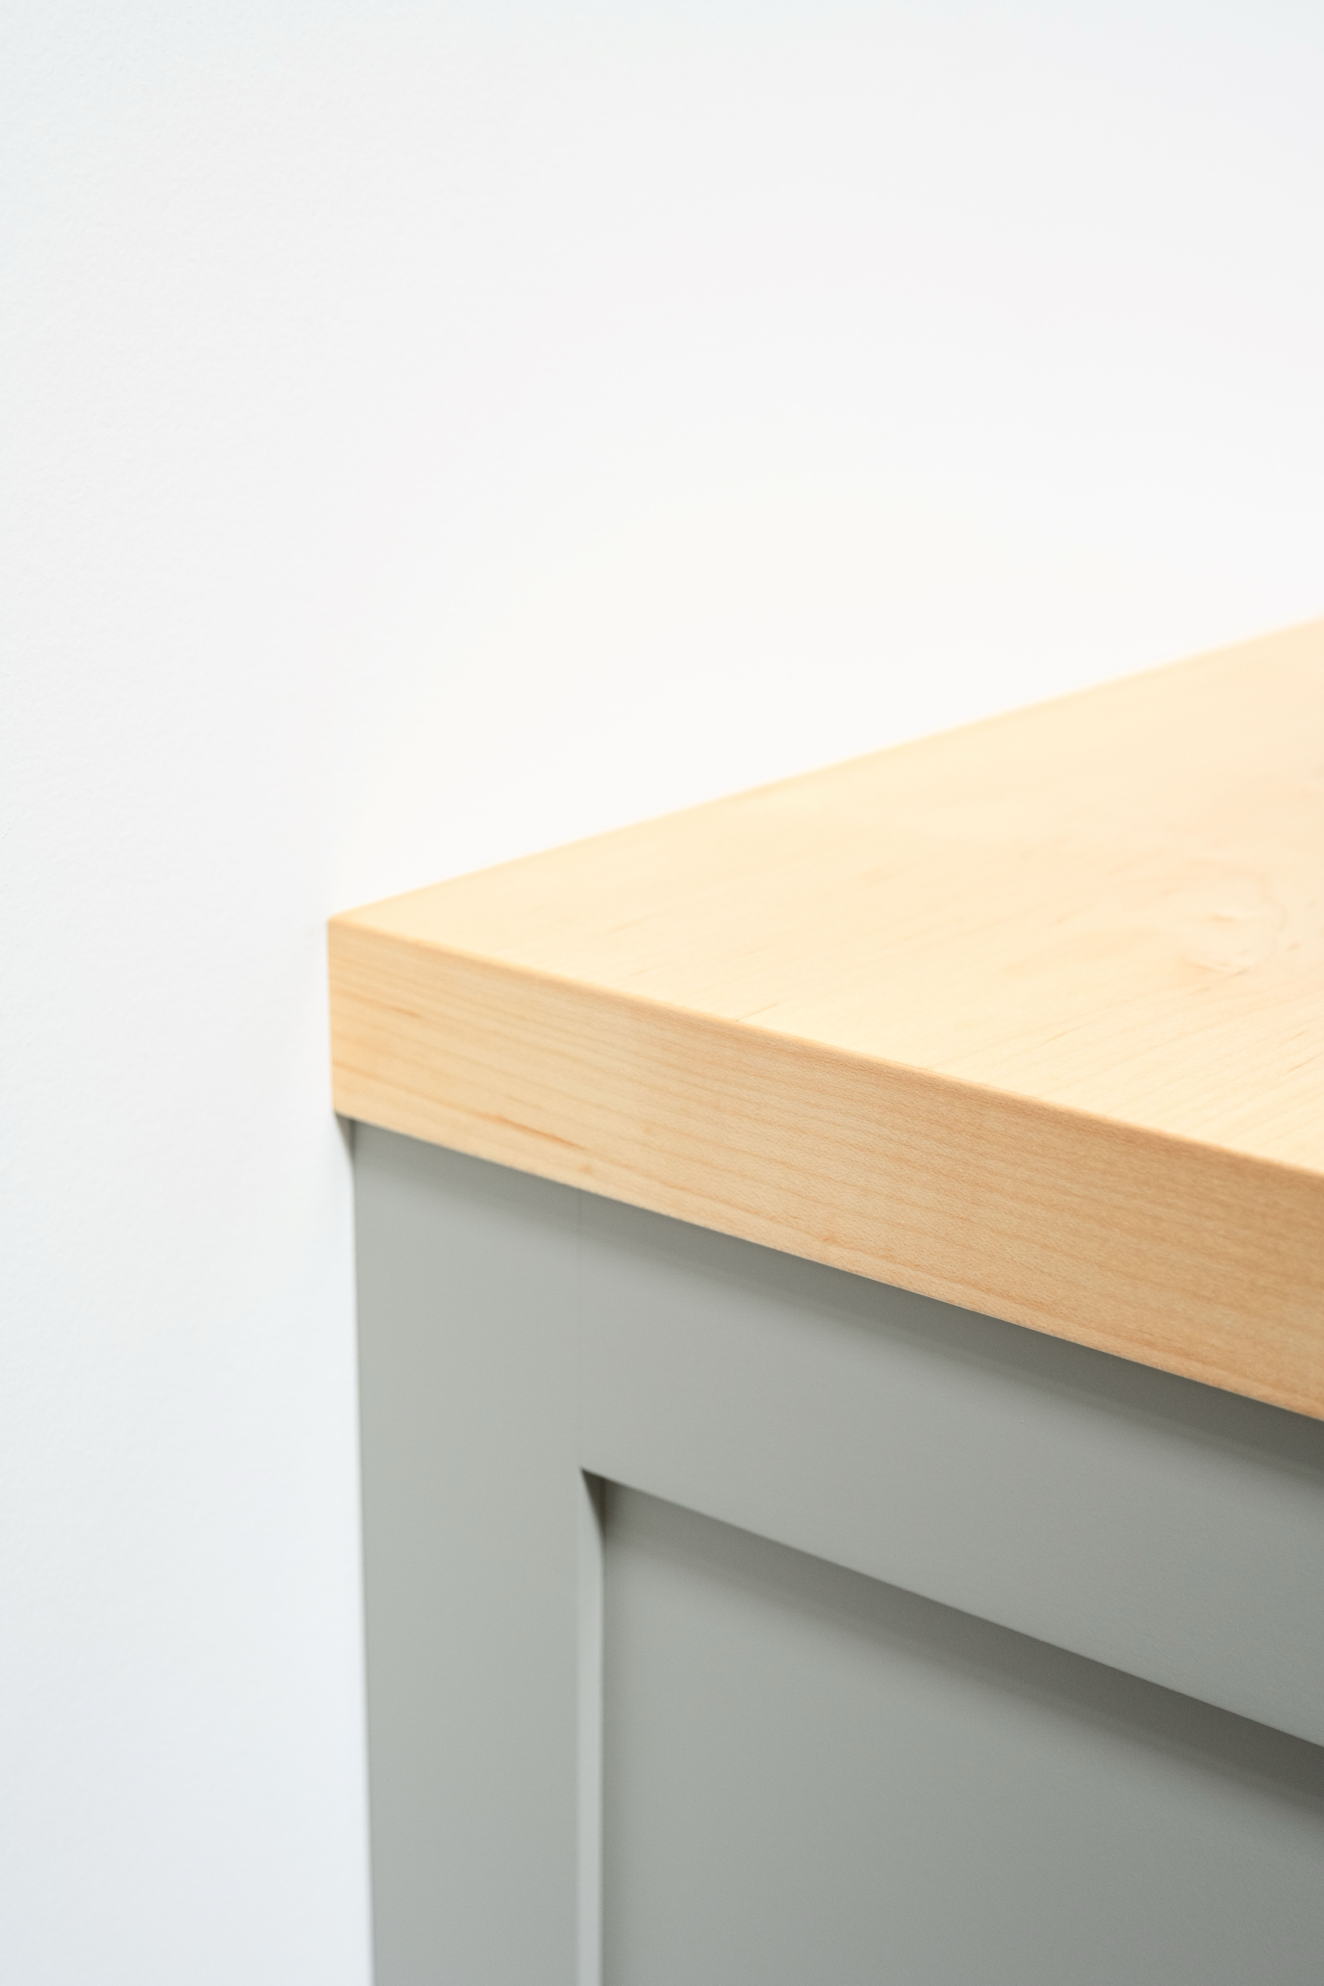 Maple 2-4" thick Cabinet Top / Slab Shelf